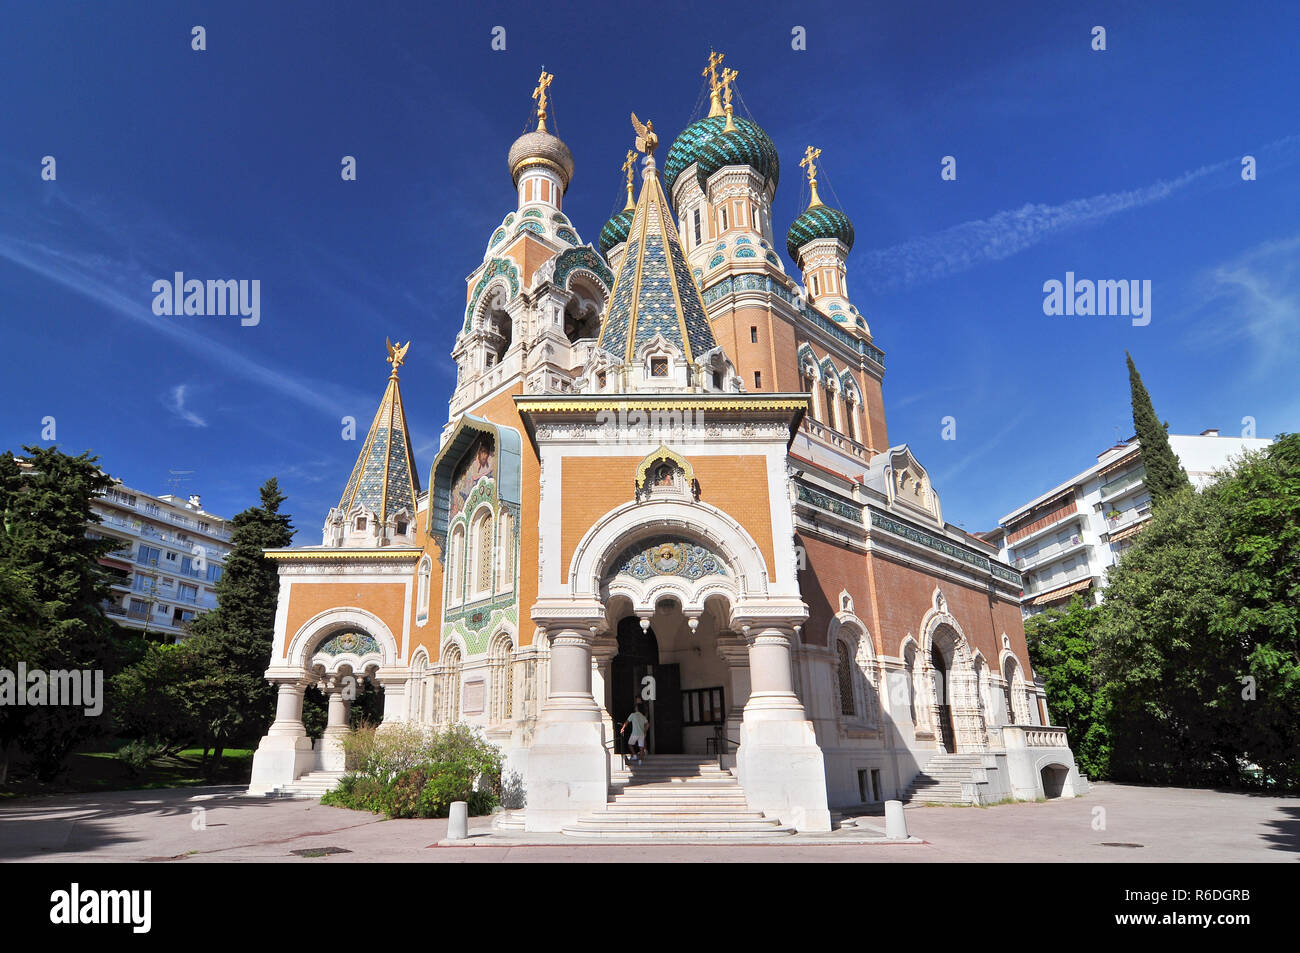 The Russian Orthodox Cathedral In Nice Cathédrale Orthodoxe Russe Saint-Nicolas De Nice Stock Photo